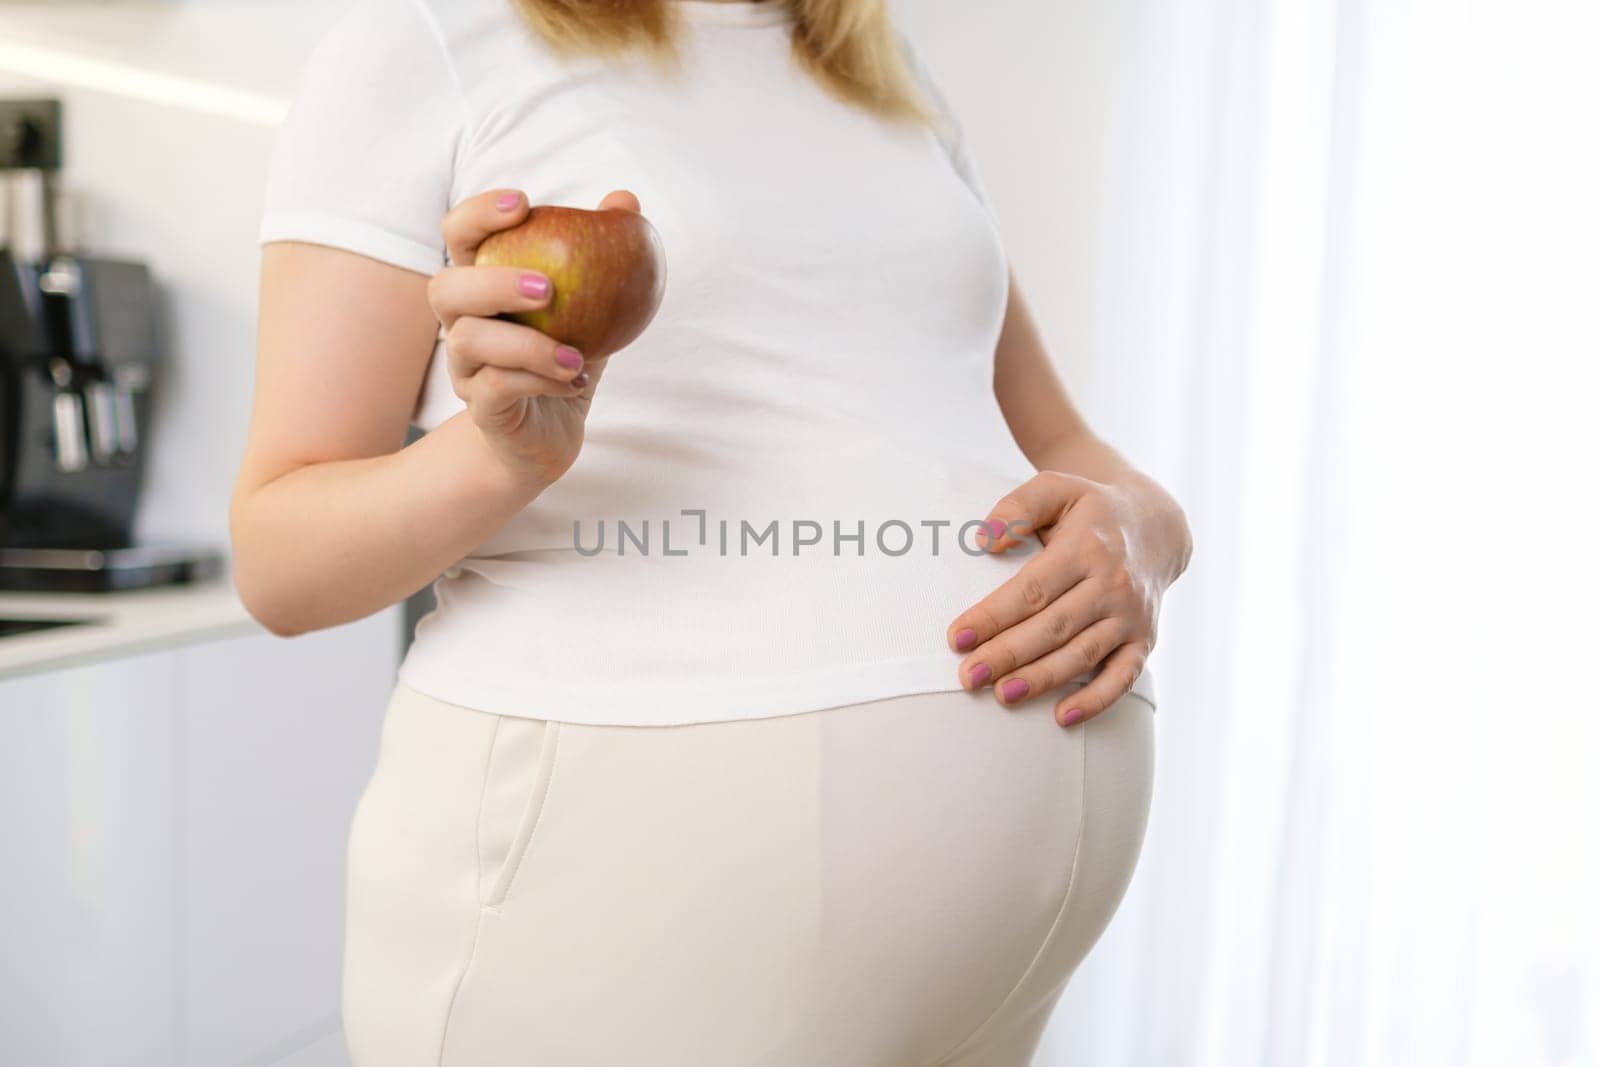 A pregnant woman is holding an apple and put her hand on her stomach. Diet during pregnancy concept.